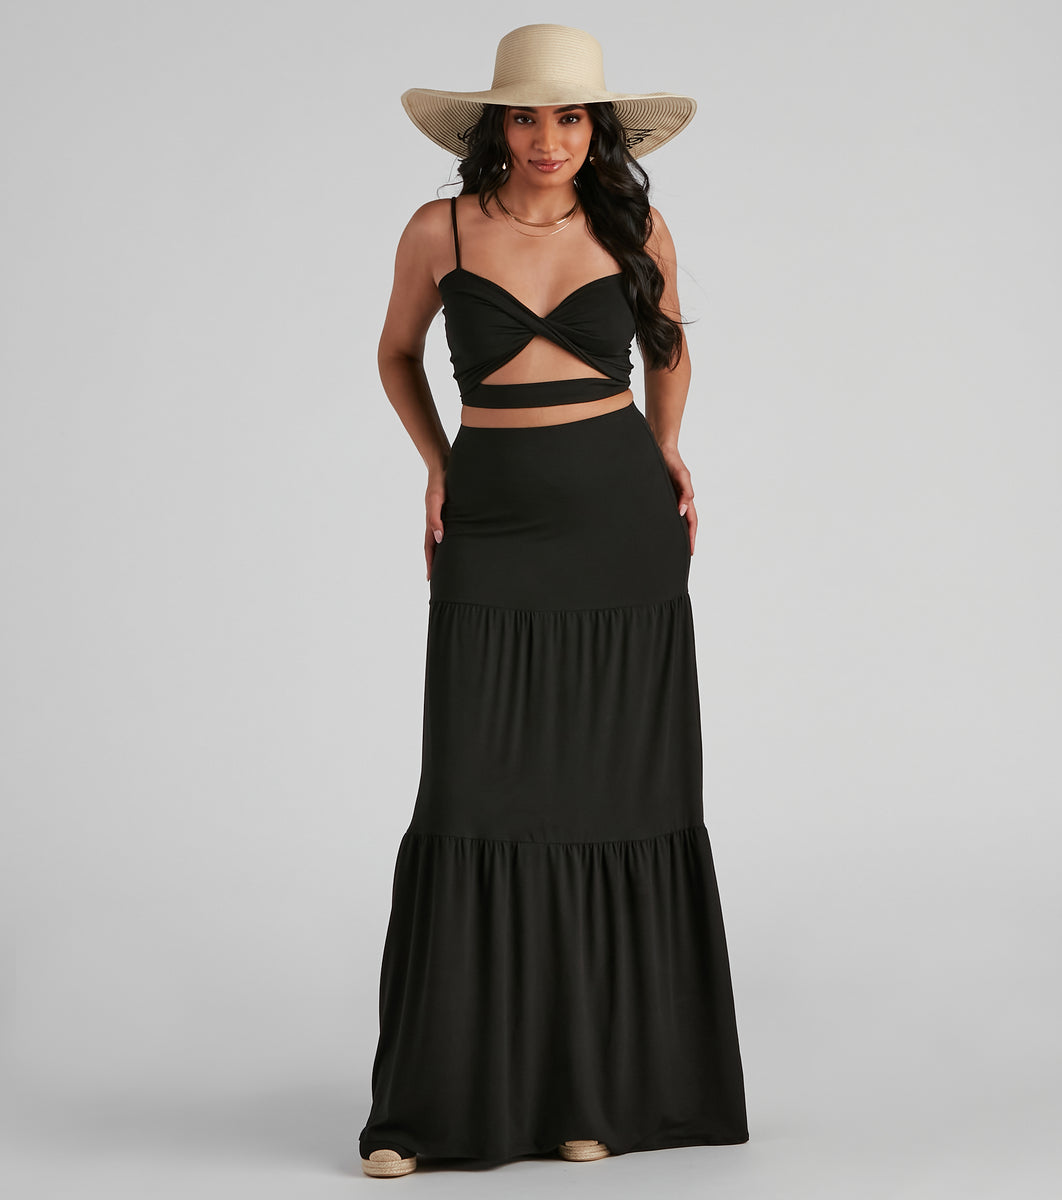 Let's Get Together Tiered Maxi Skirt